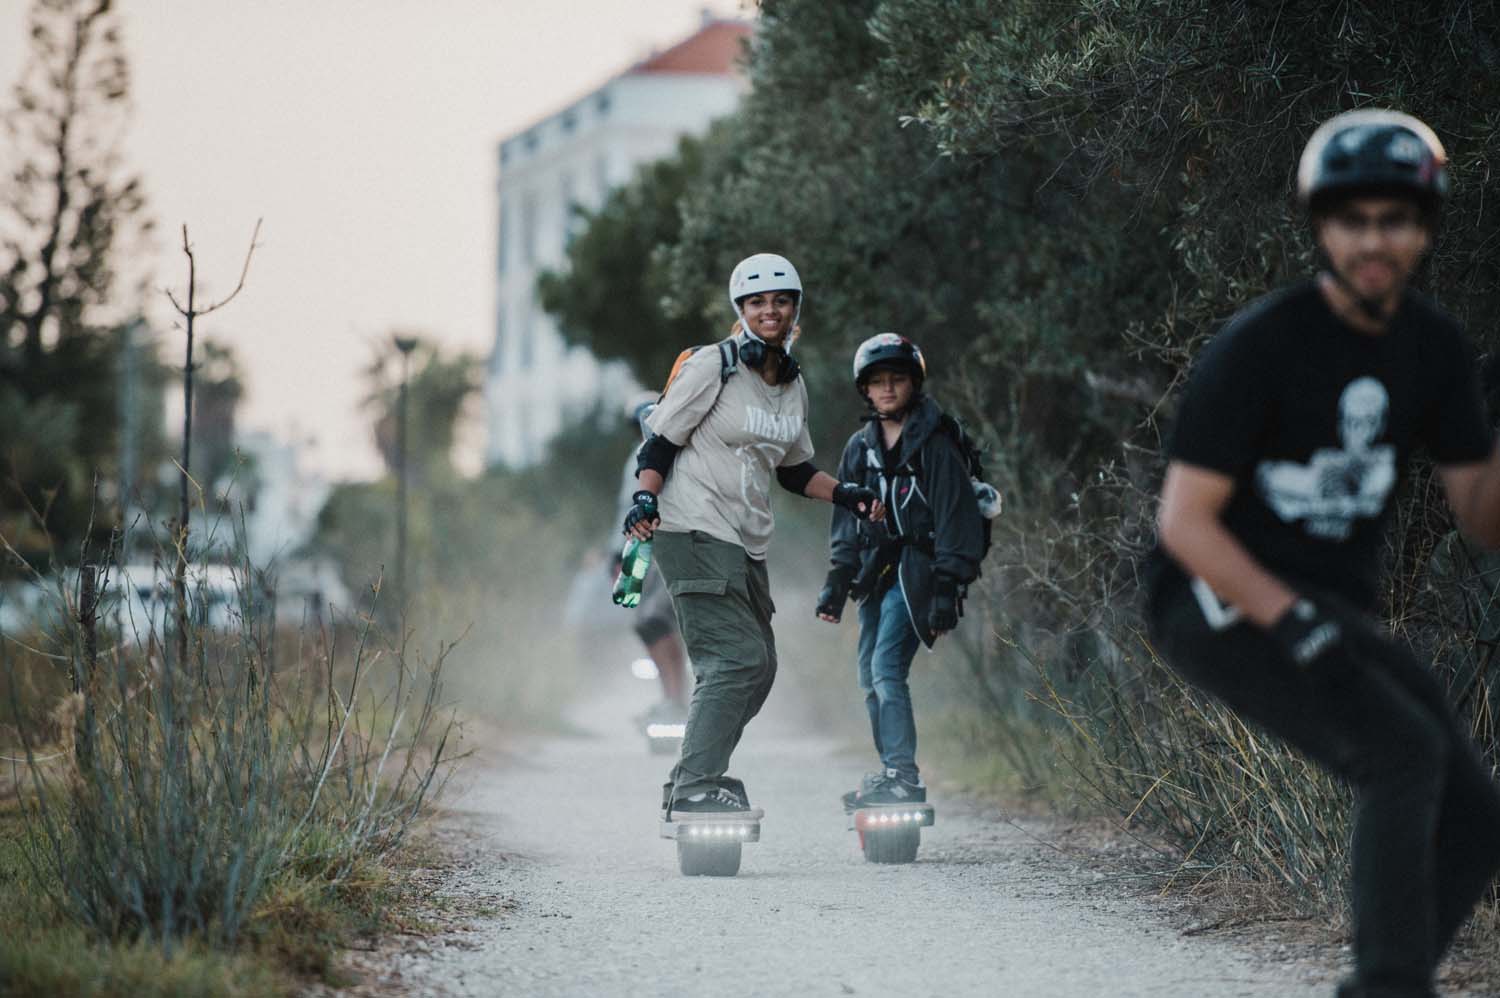 Family and friends hit the trails at Onewheel Algarve Tour 2022. Courtesy photo